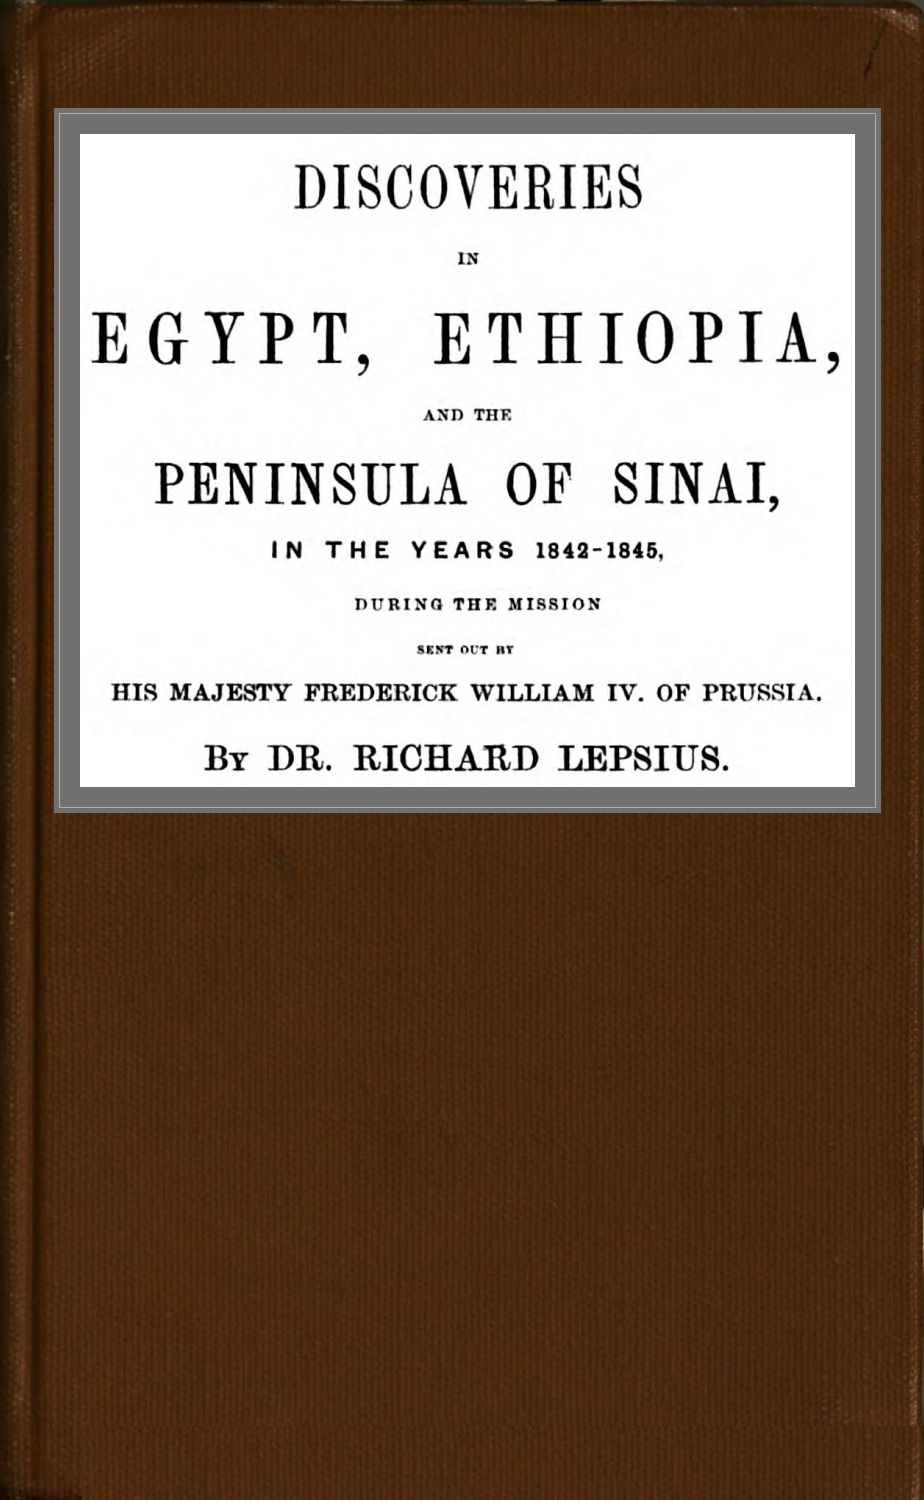 The Project Gutenberg eBook of Discoveries in Egypt, Ethiopia, and the peninsula of Sinai by Richard Lepsius. photo photo